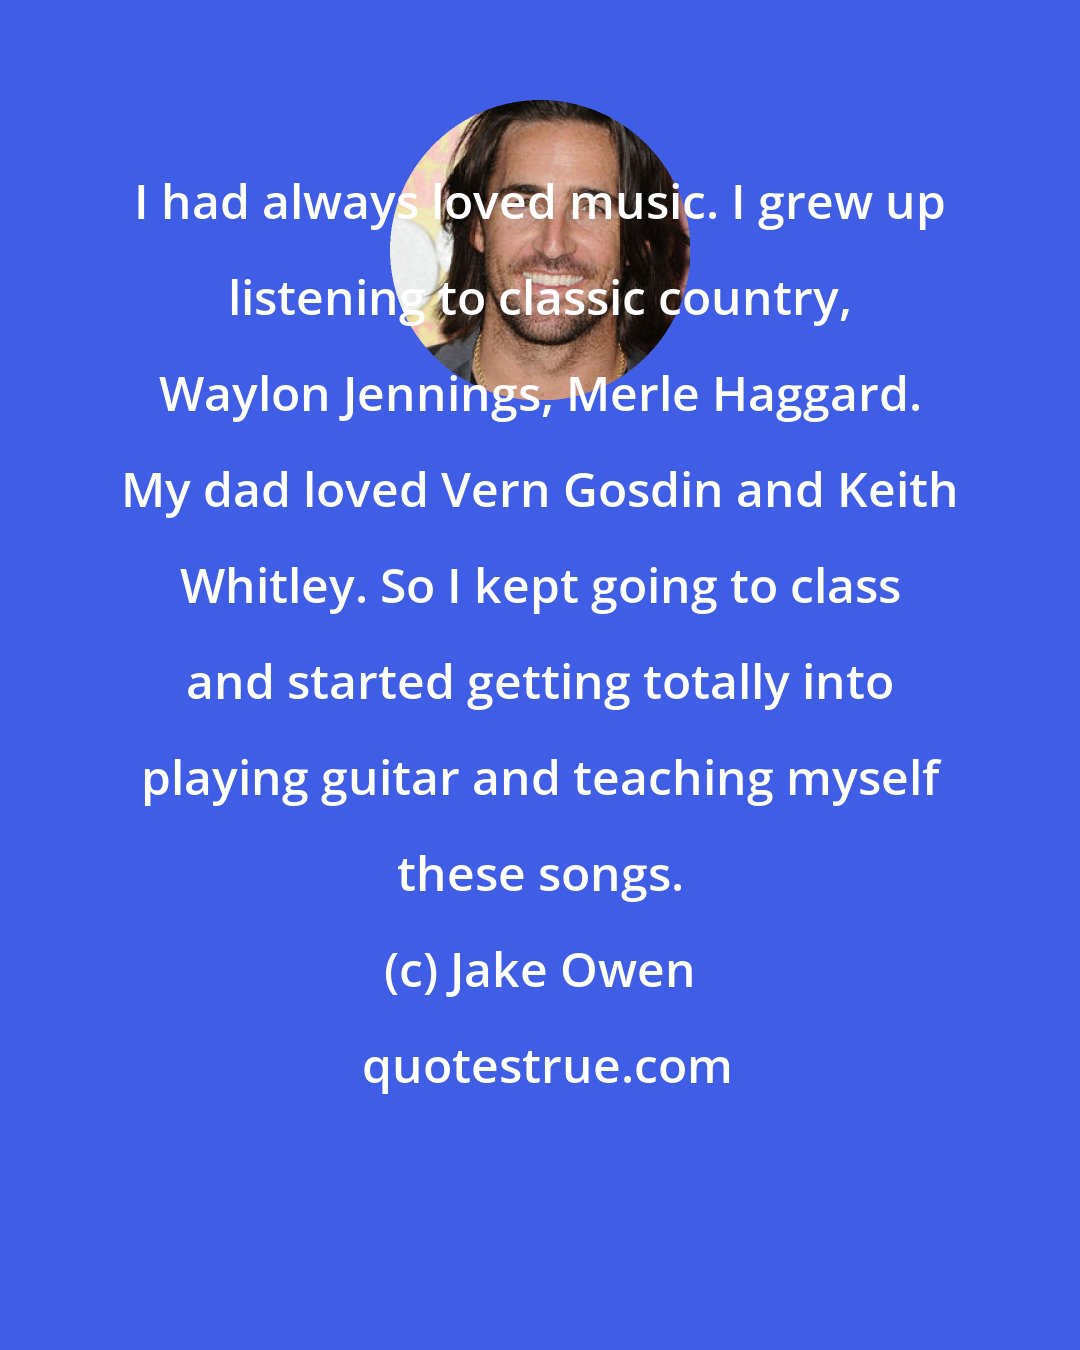 Jake Owen: I had always loved music. I grew up listening to classic country, Waylon Jennings, Merle Haggard. My dad loved Vern Gosdin and Keith Whitley. So I kept going to class and started getting totally into playing guitar and teaching myself these songs.